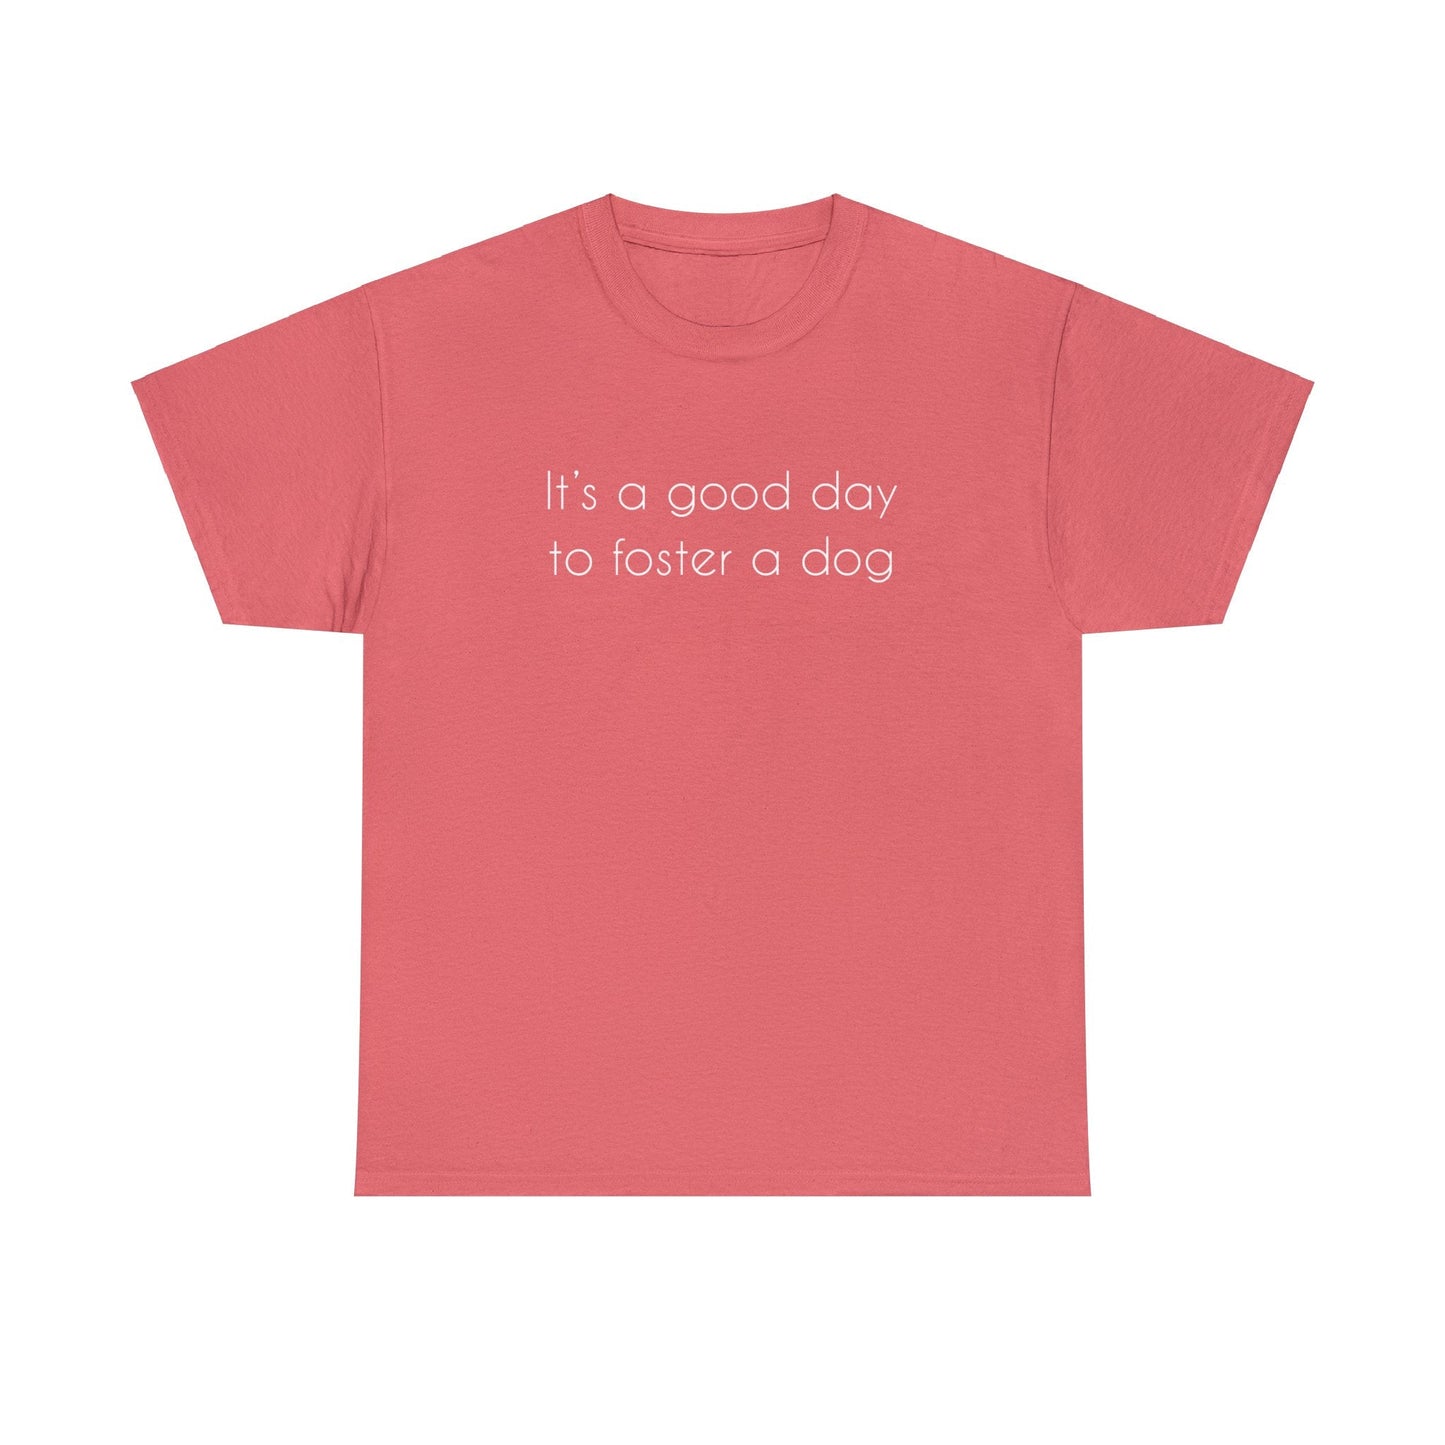 It's A Good Day To Foster A Dog | Text Tees - Detezi Designs-98734007969285712570